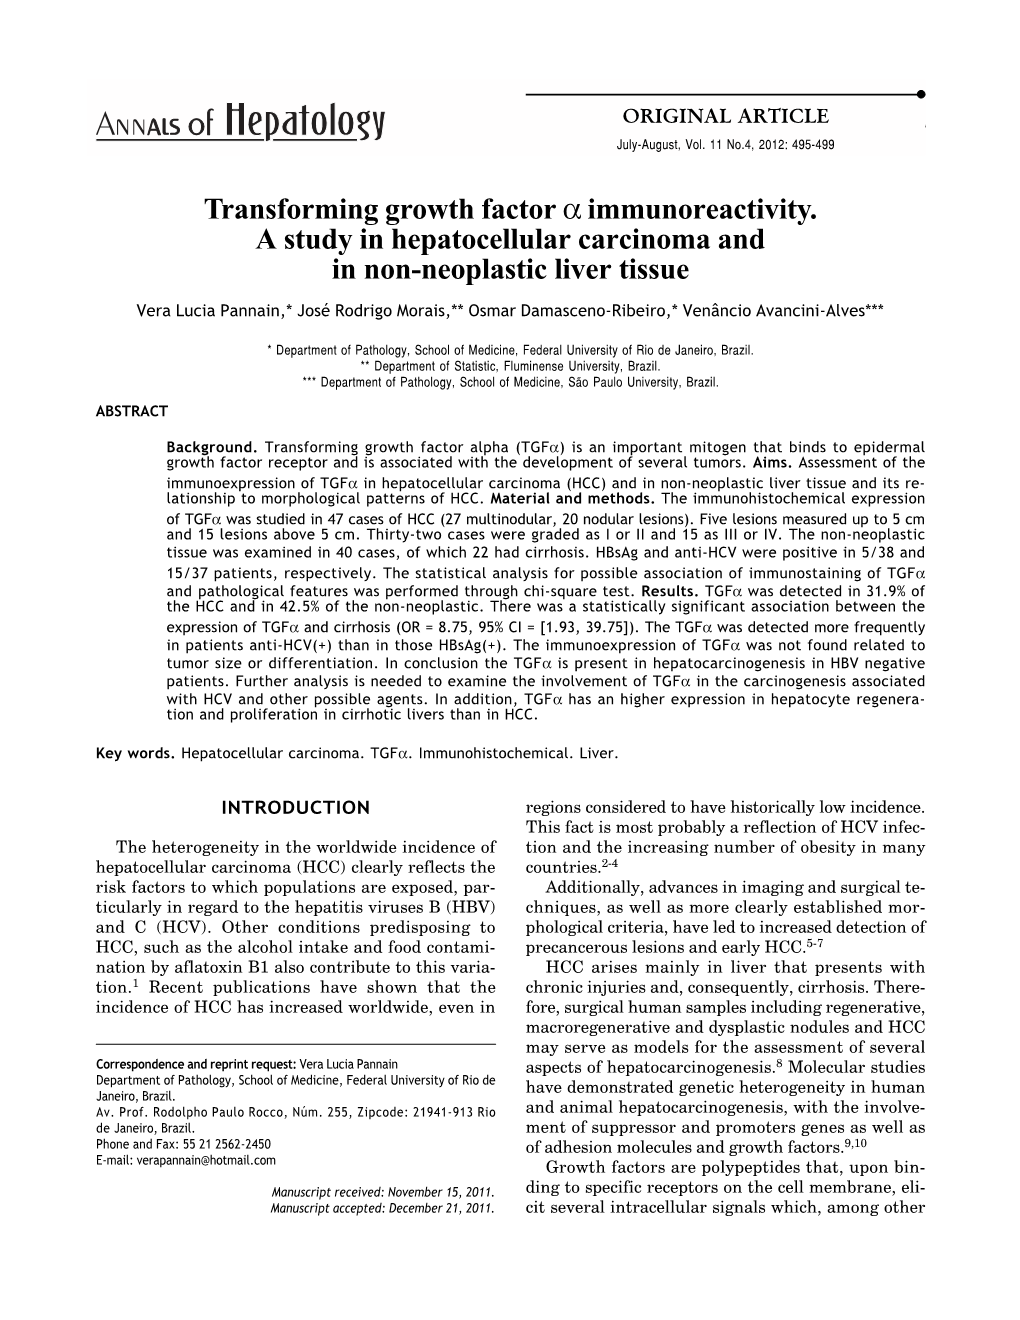 Transforming Growth Factor Α Immunoreactivity. a Study in Hepatocellular Carcinoma and in Non-Neoplastic Liver Tissue